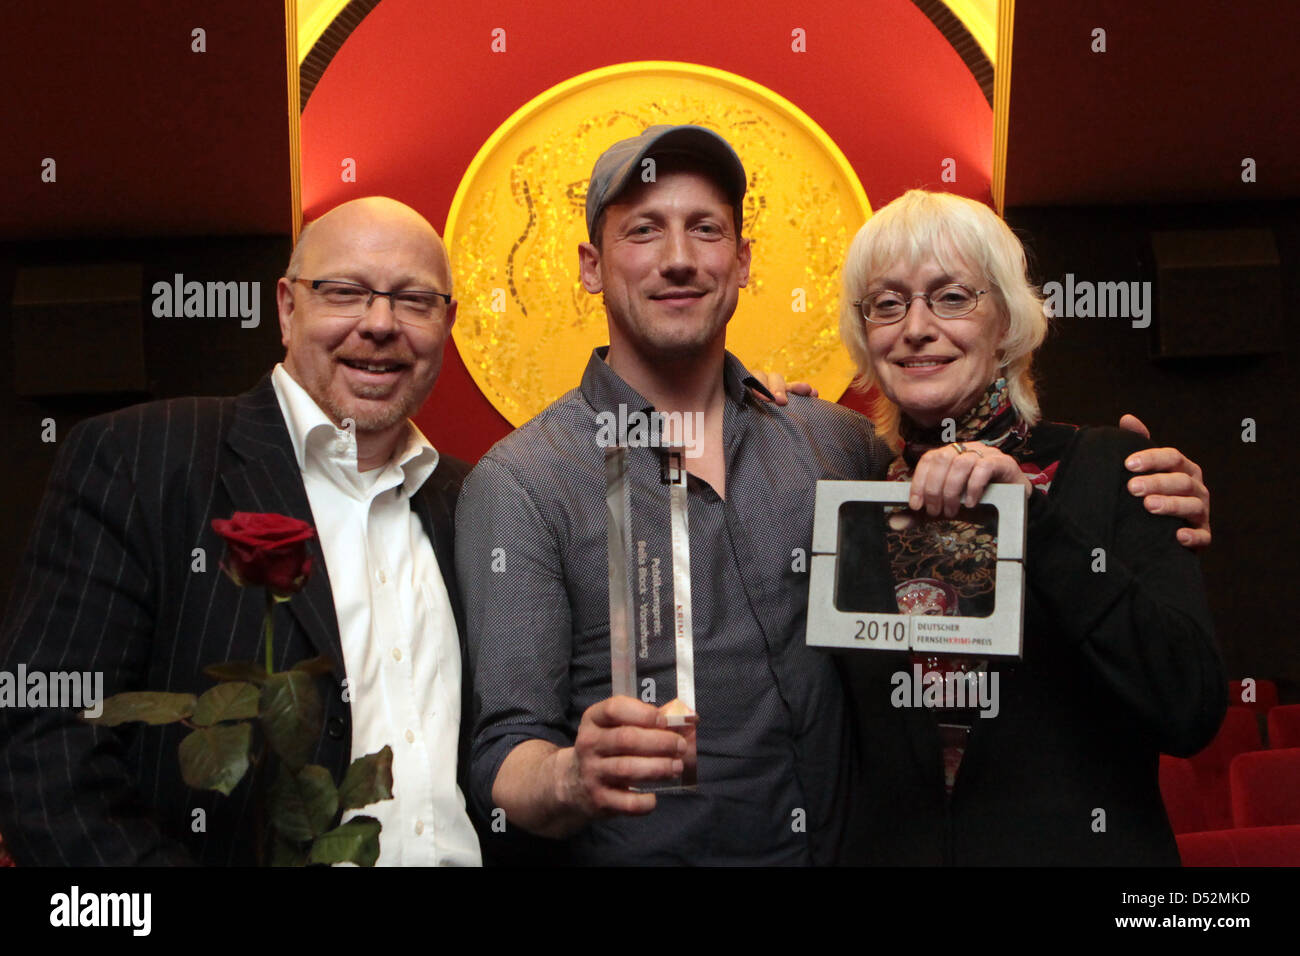 Pit Ramplet, actor Wotan Wilke Moehring and producer Cornelia Wecker (L-R)  pose together with their awards for the ZDF production ''Bella Block -  Vorsehung''at Caligari Filmstage in Wiesbaden, Germany, 06 March 2010.